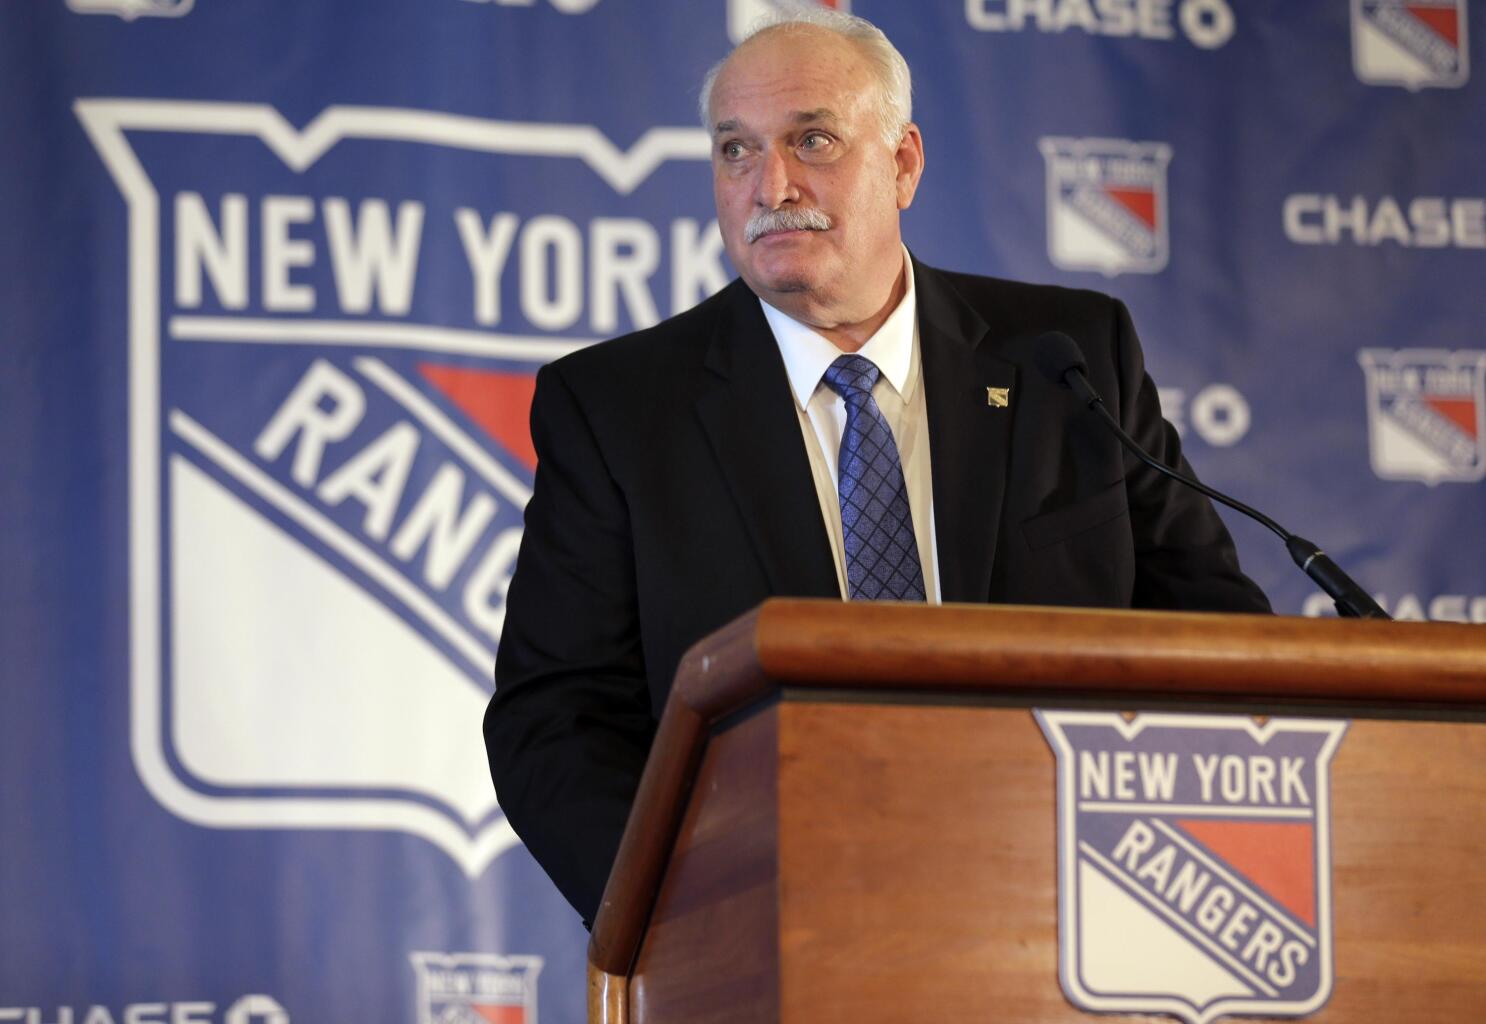 NY Rangers, Bruins have 'framework' of deal for Nash, report says